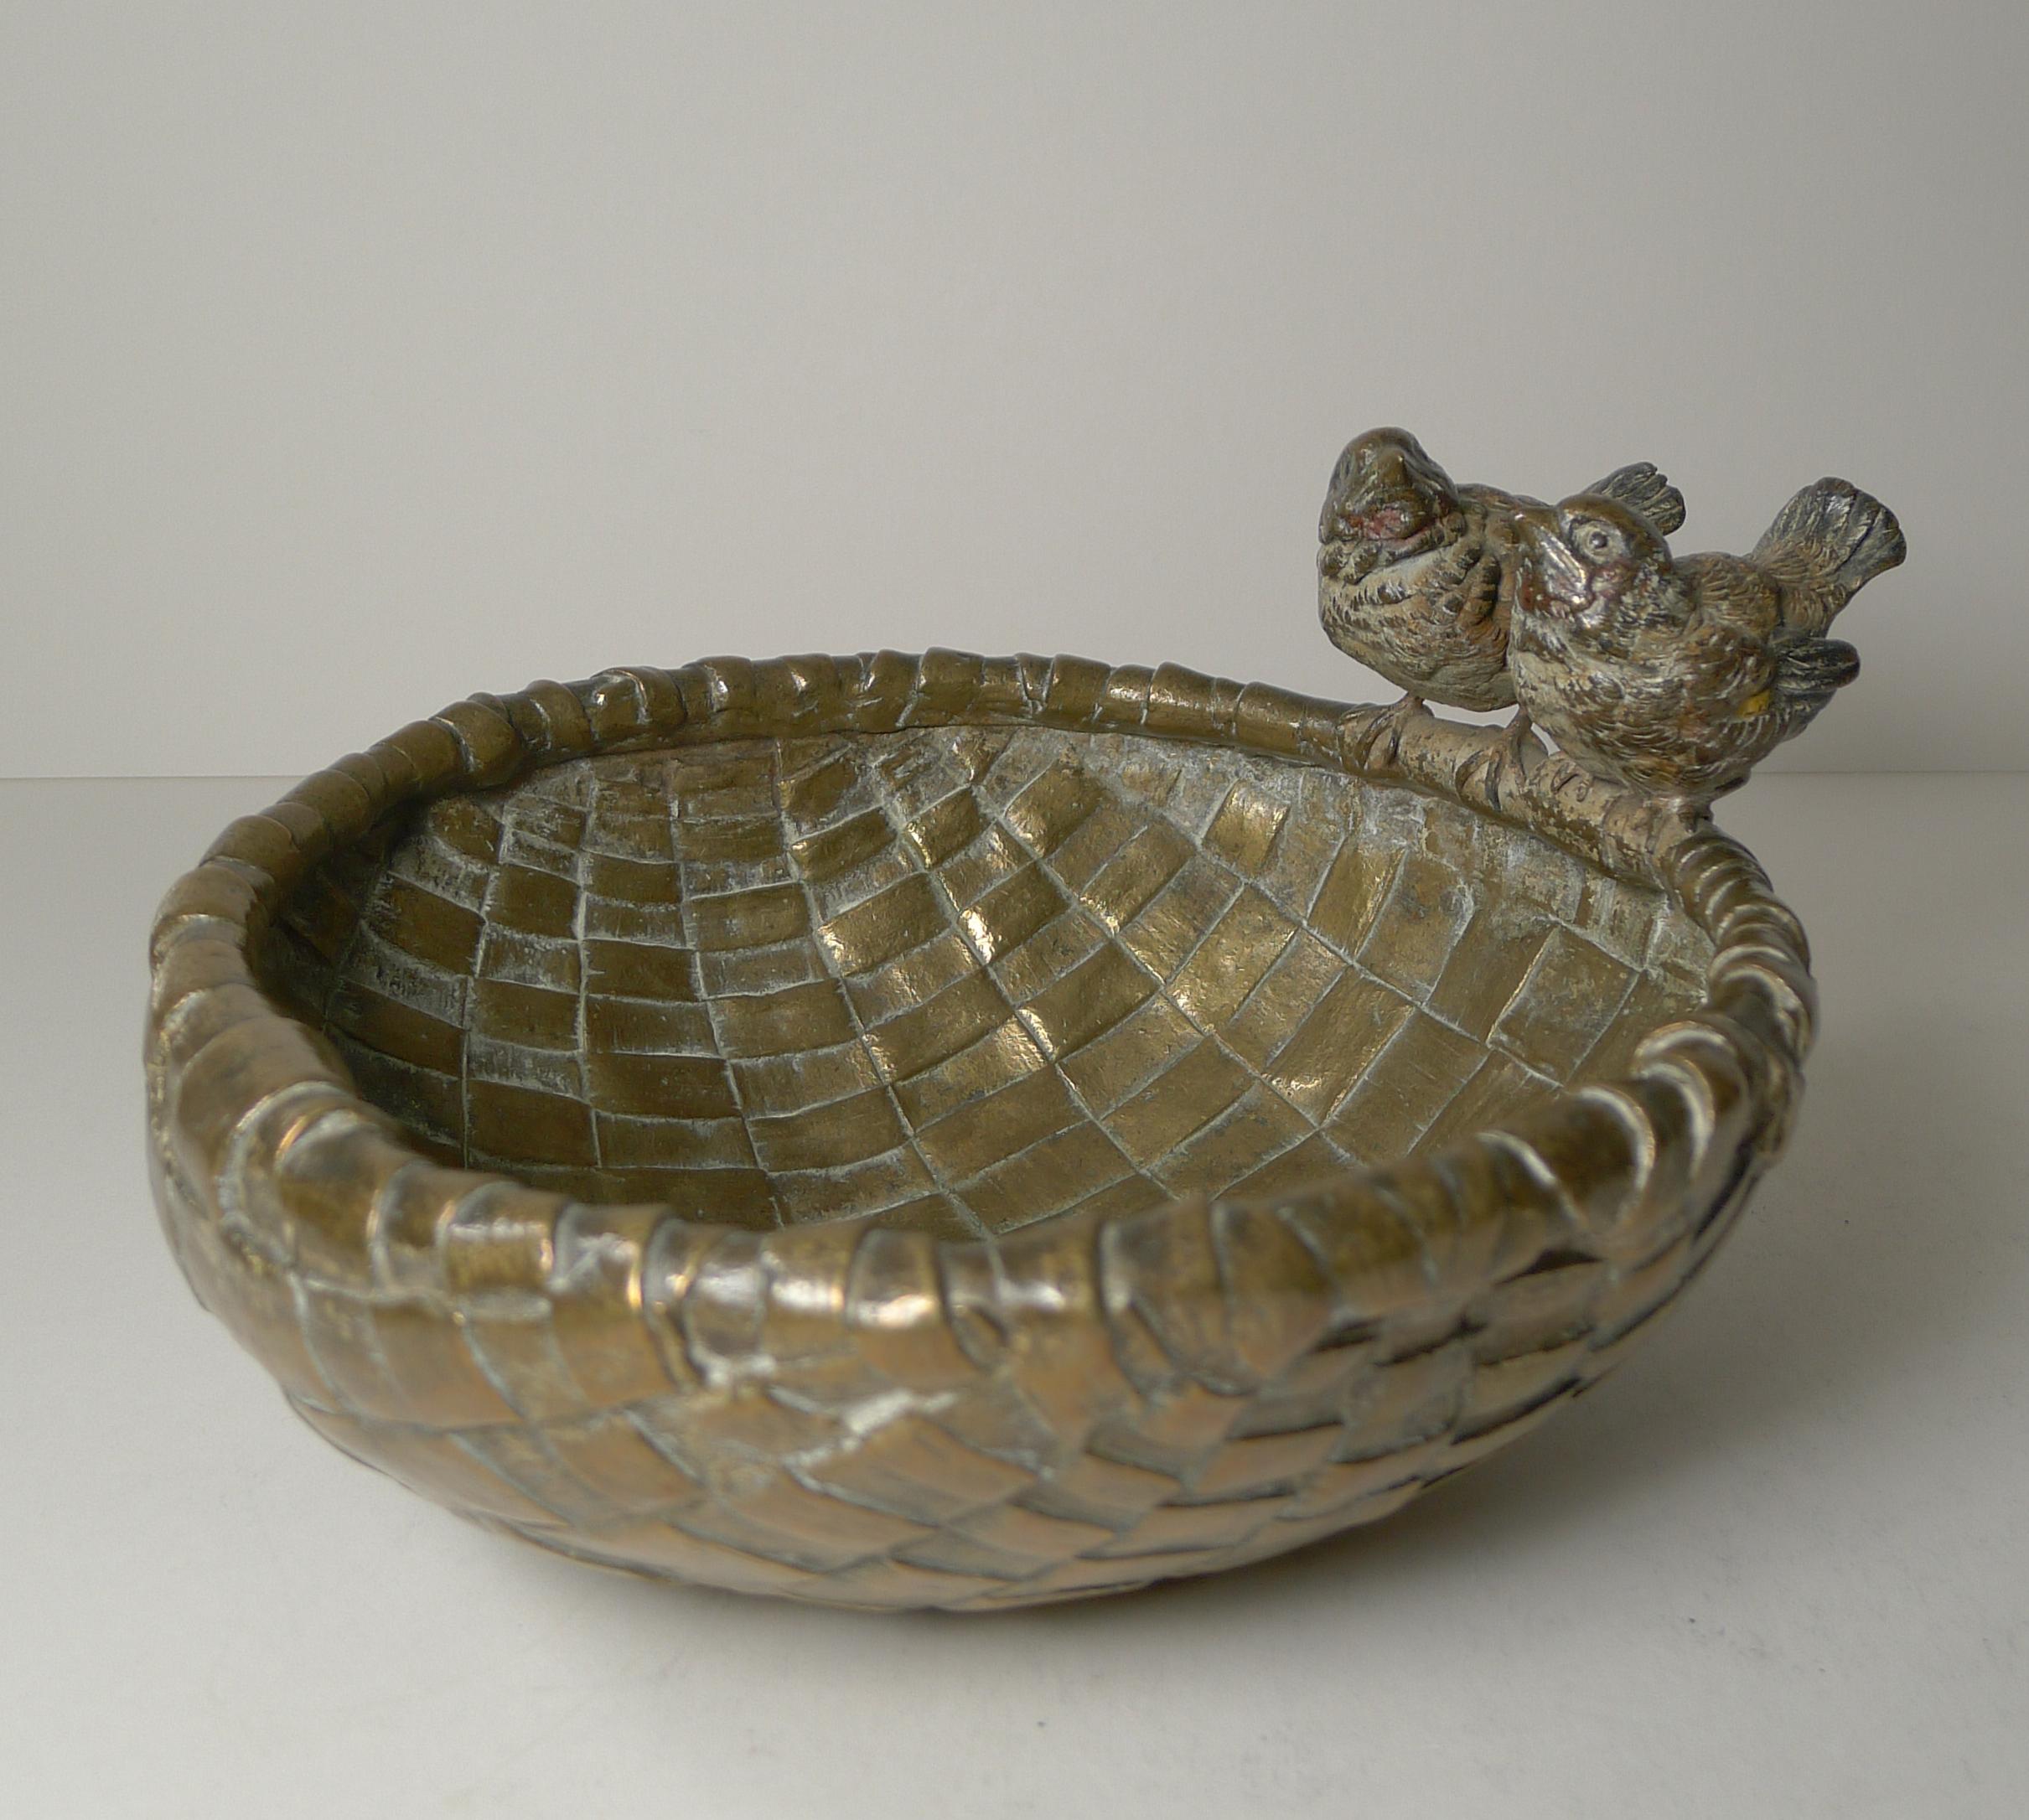 A fabulous impressive large bronze, a very solid and heavy piece. The bowl is fashioned to resemble a basket with some cold painted highlights in places.

On the side are the two most adorable cold painted birds (Wrens), beautifully cast and with